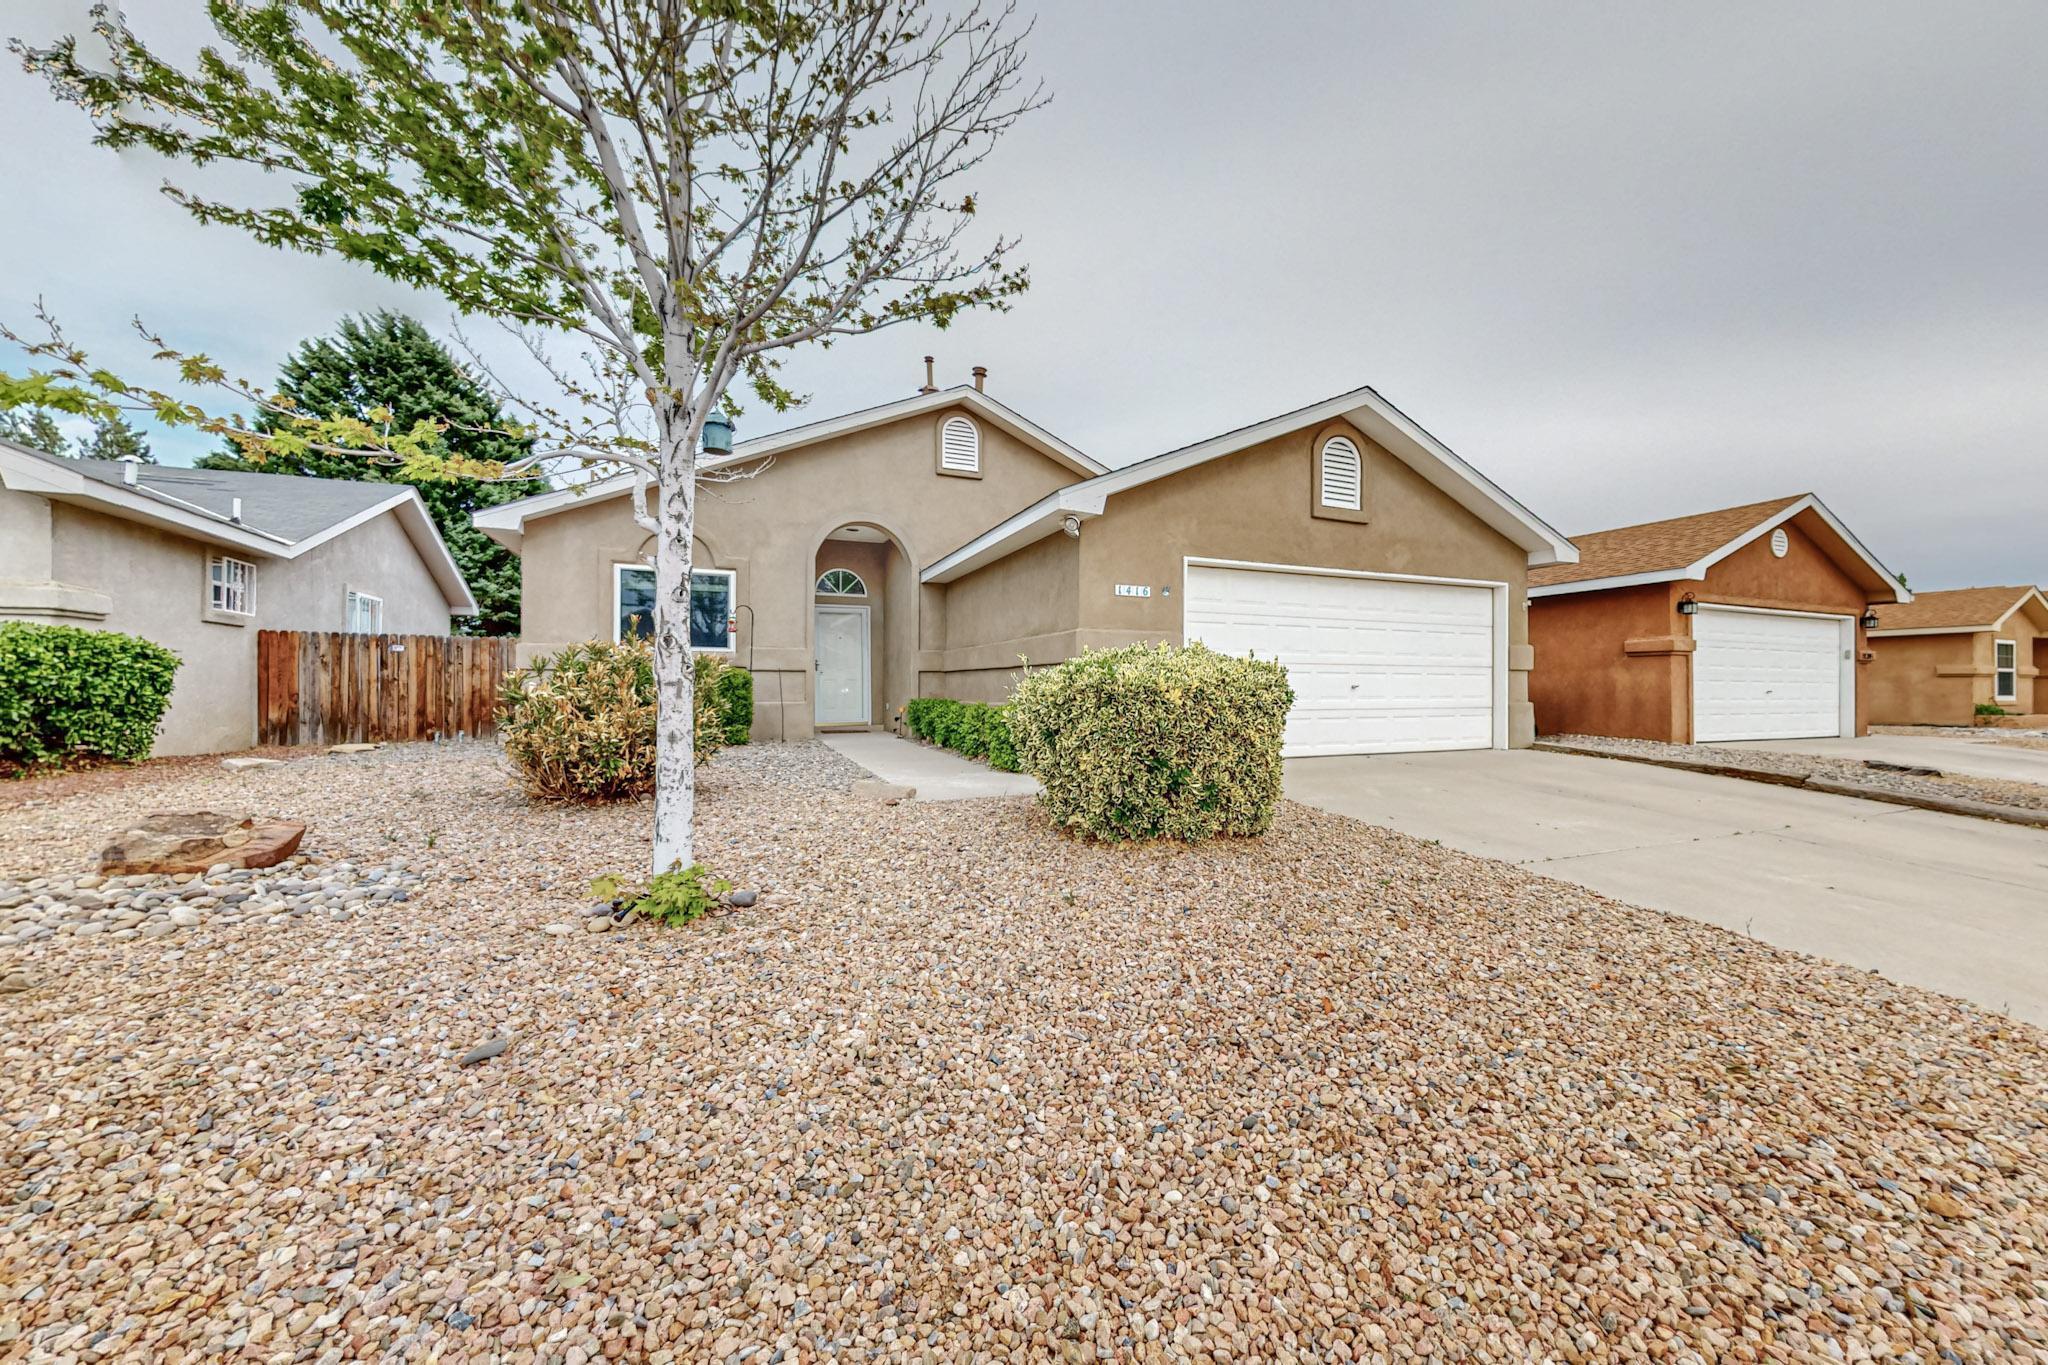 1416 Stoneway Drive NW, Albuquerque, New Mexico 87120, 3 Bedrooms Bedrooms, ,2 BathroomsBathrooms,Residential,For Sale,1416 Stoneway Drive NW,1061392